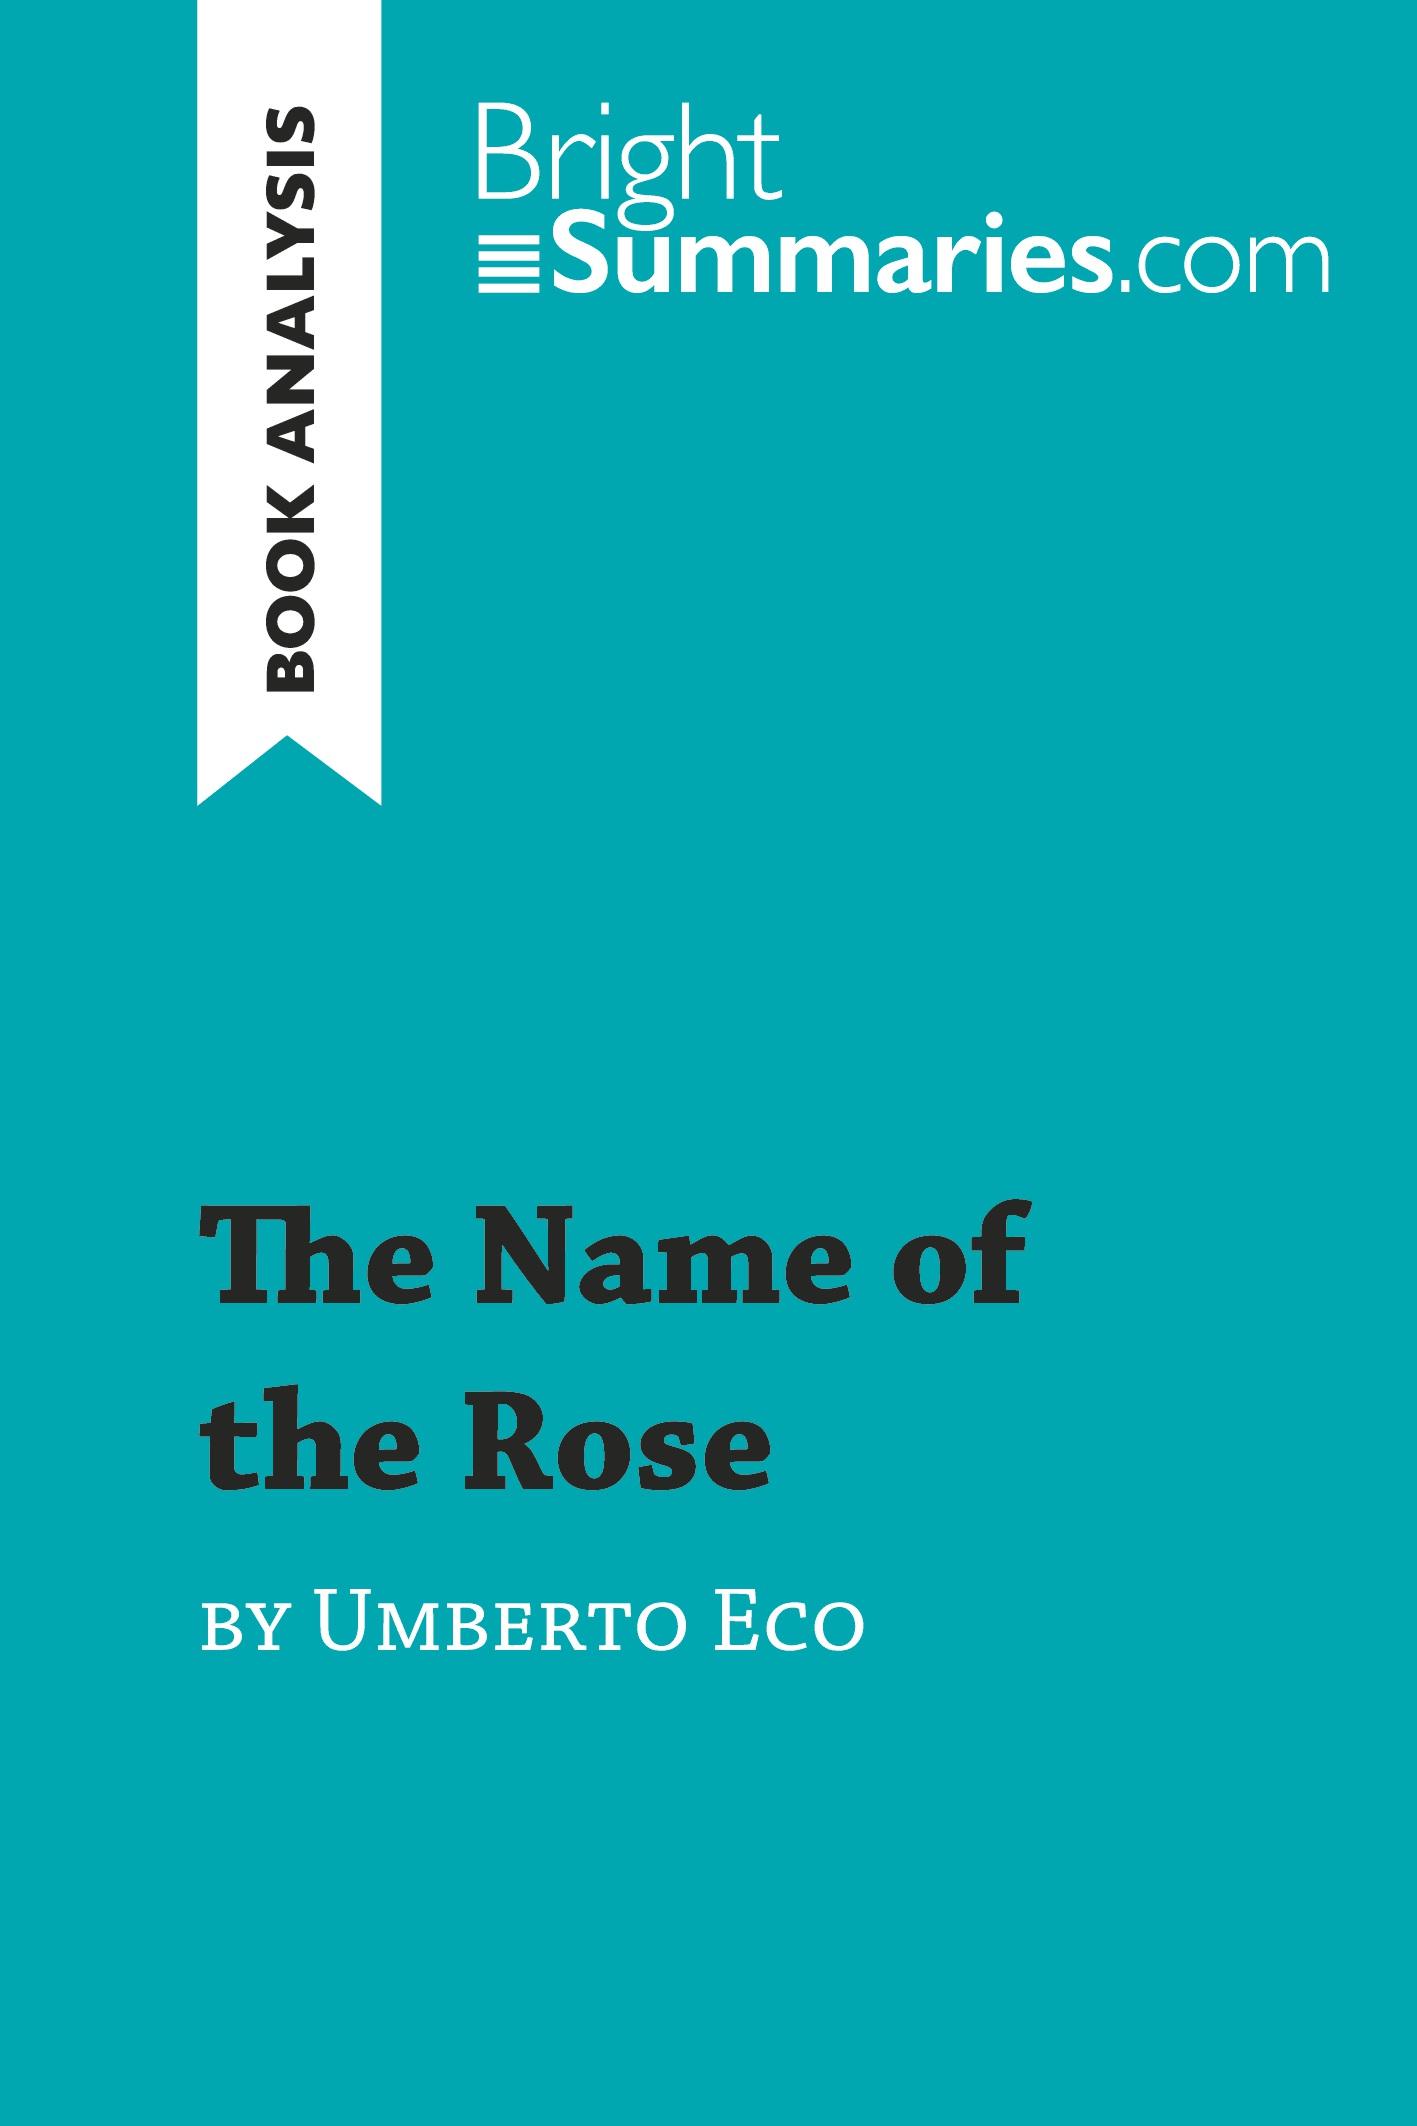 The Name of the Rose by Umberto Eco (Book Analysis) - Summaries, Bright